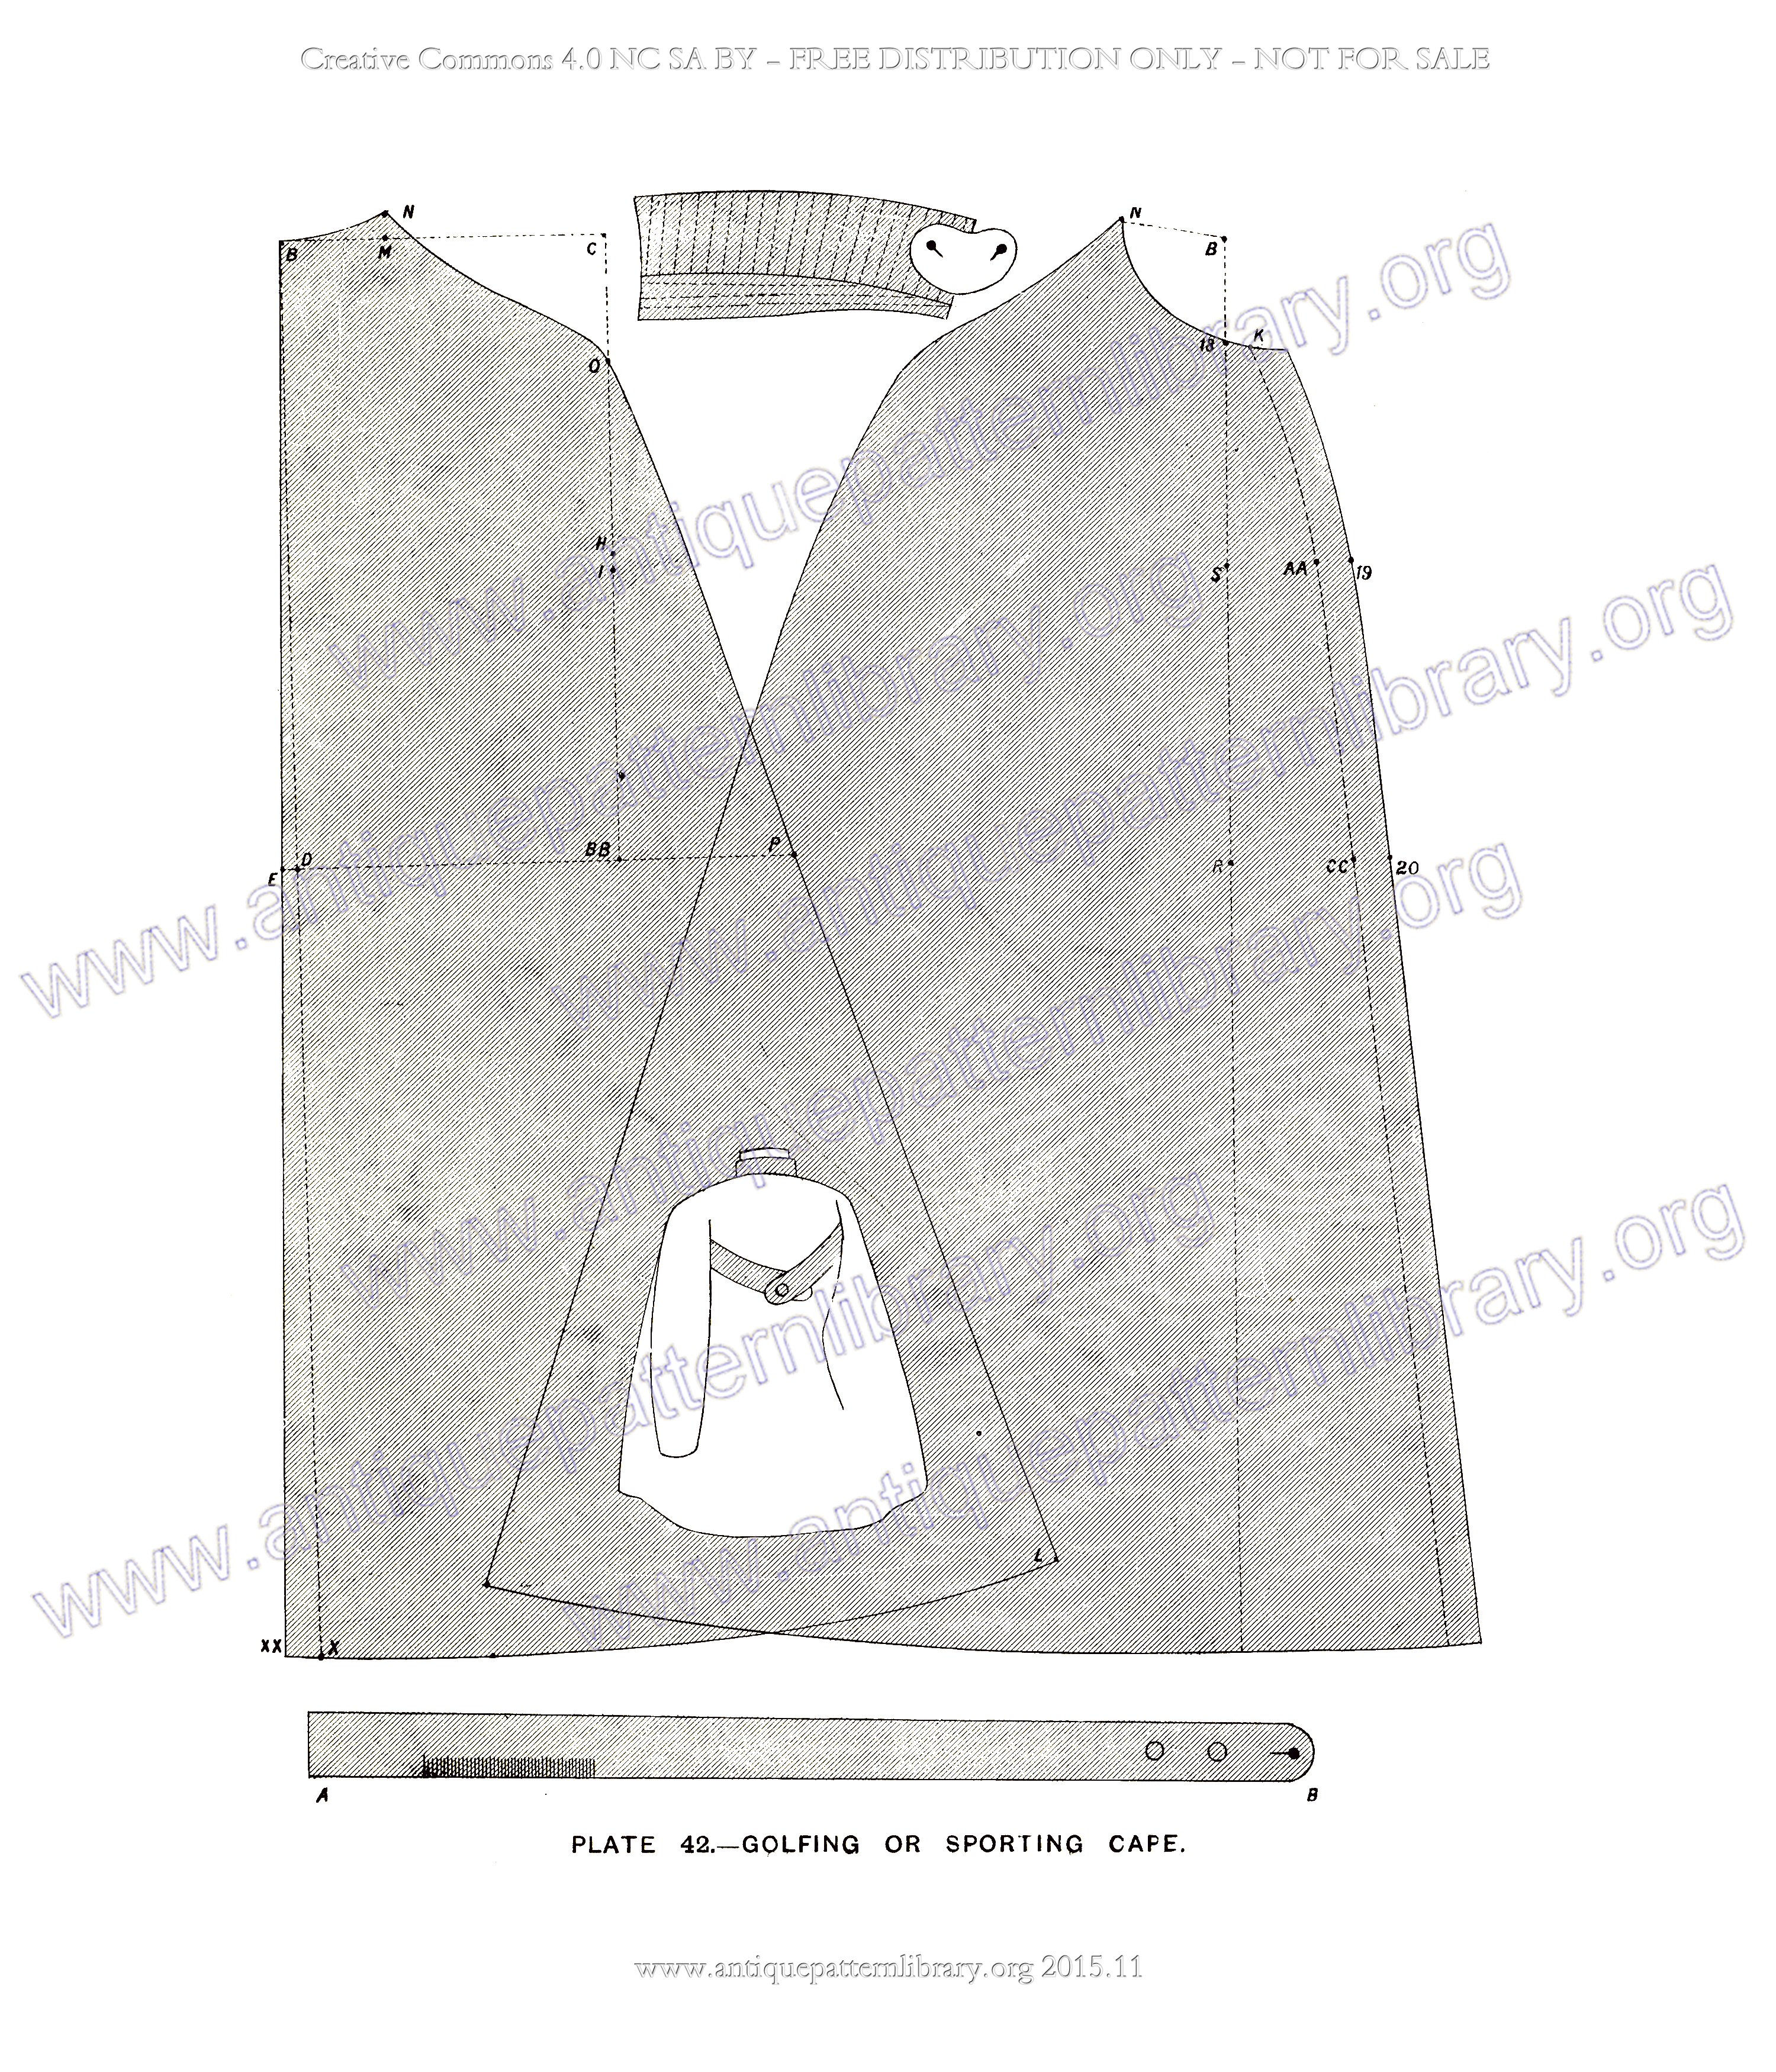 F-PK001 The Sectional System of Gentlemen's Garment Cutting